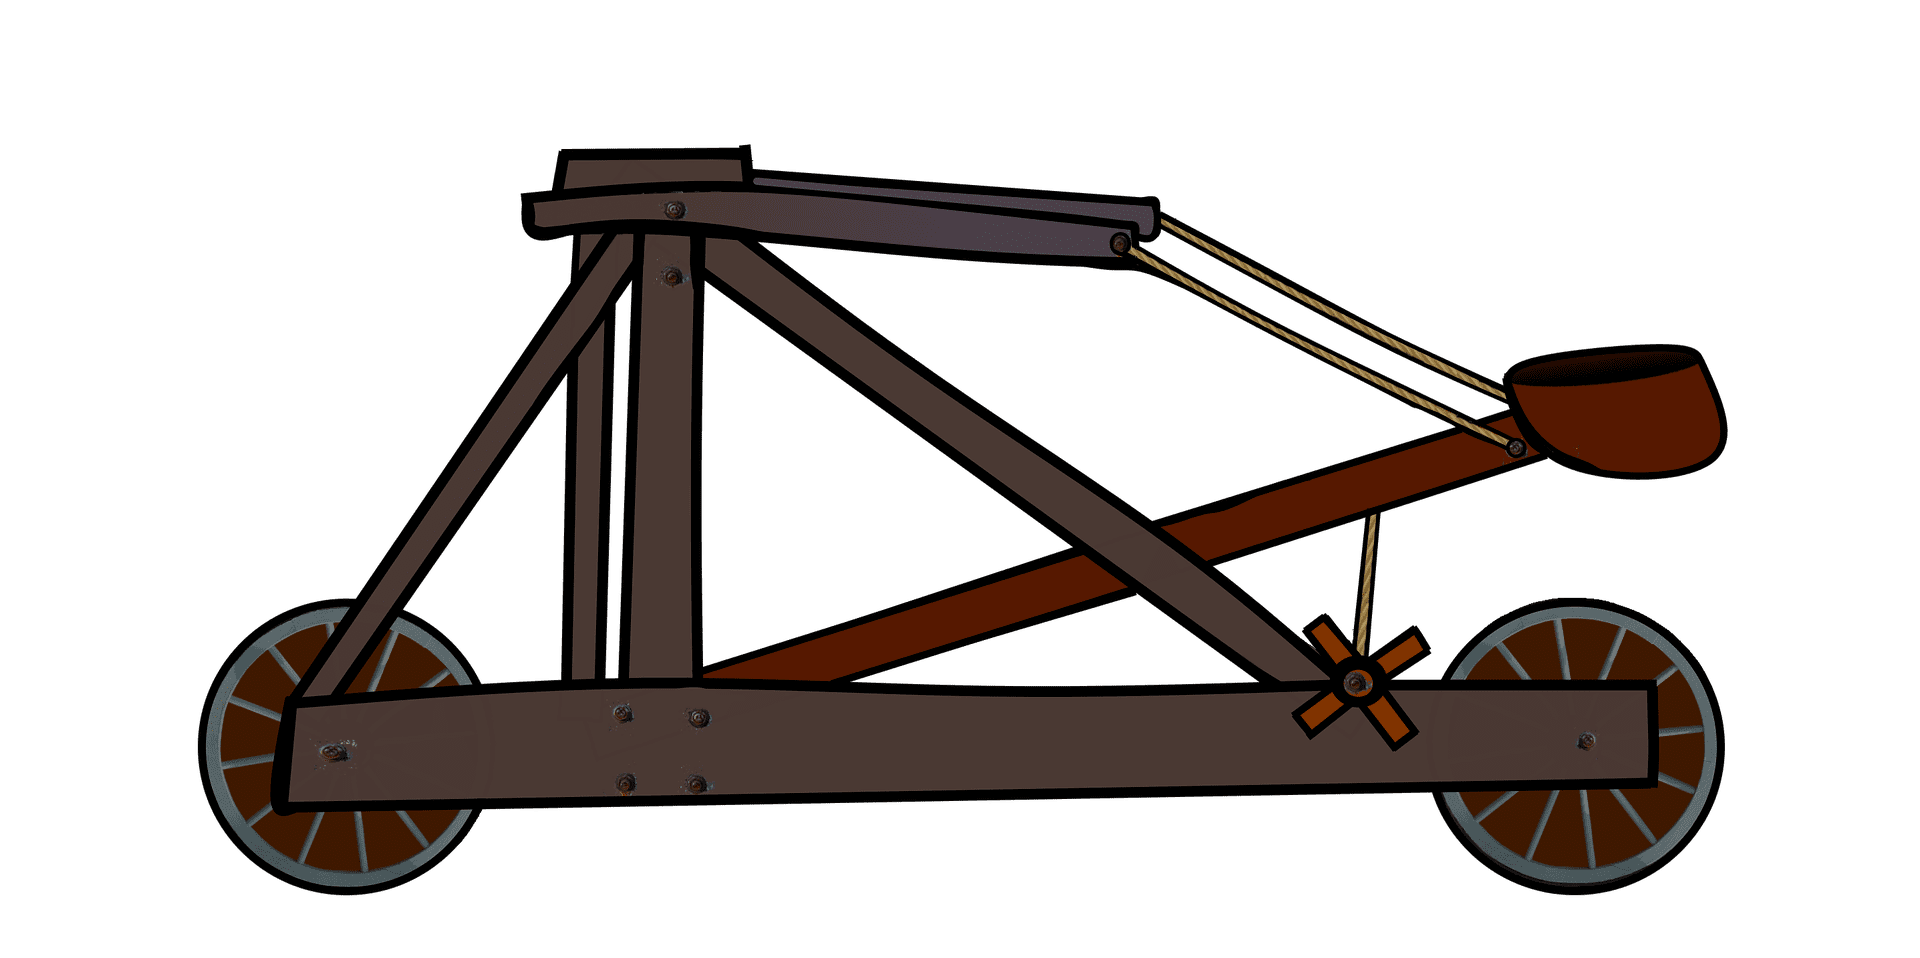 An illustration of a classic wooden catapult.